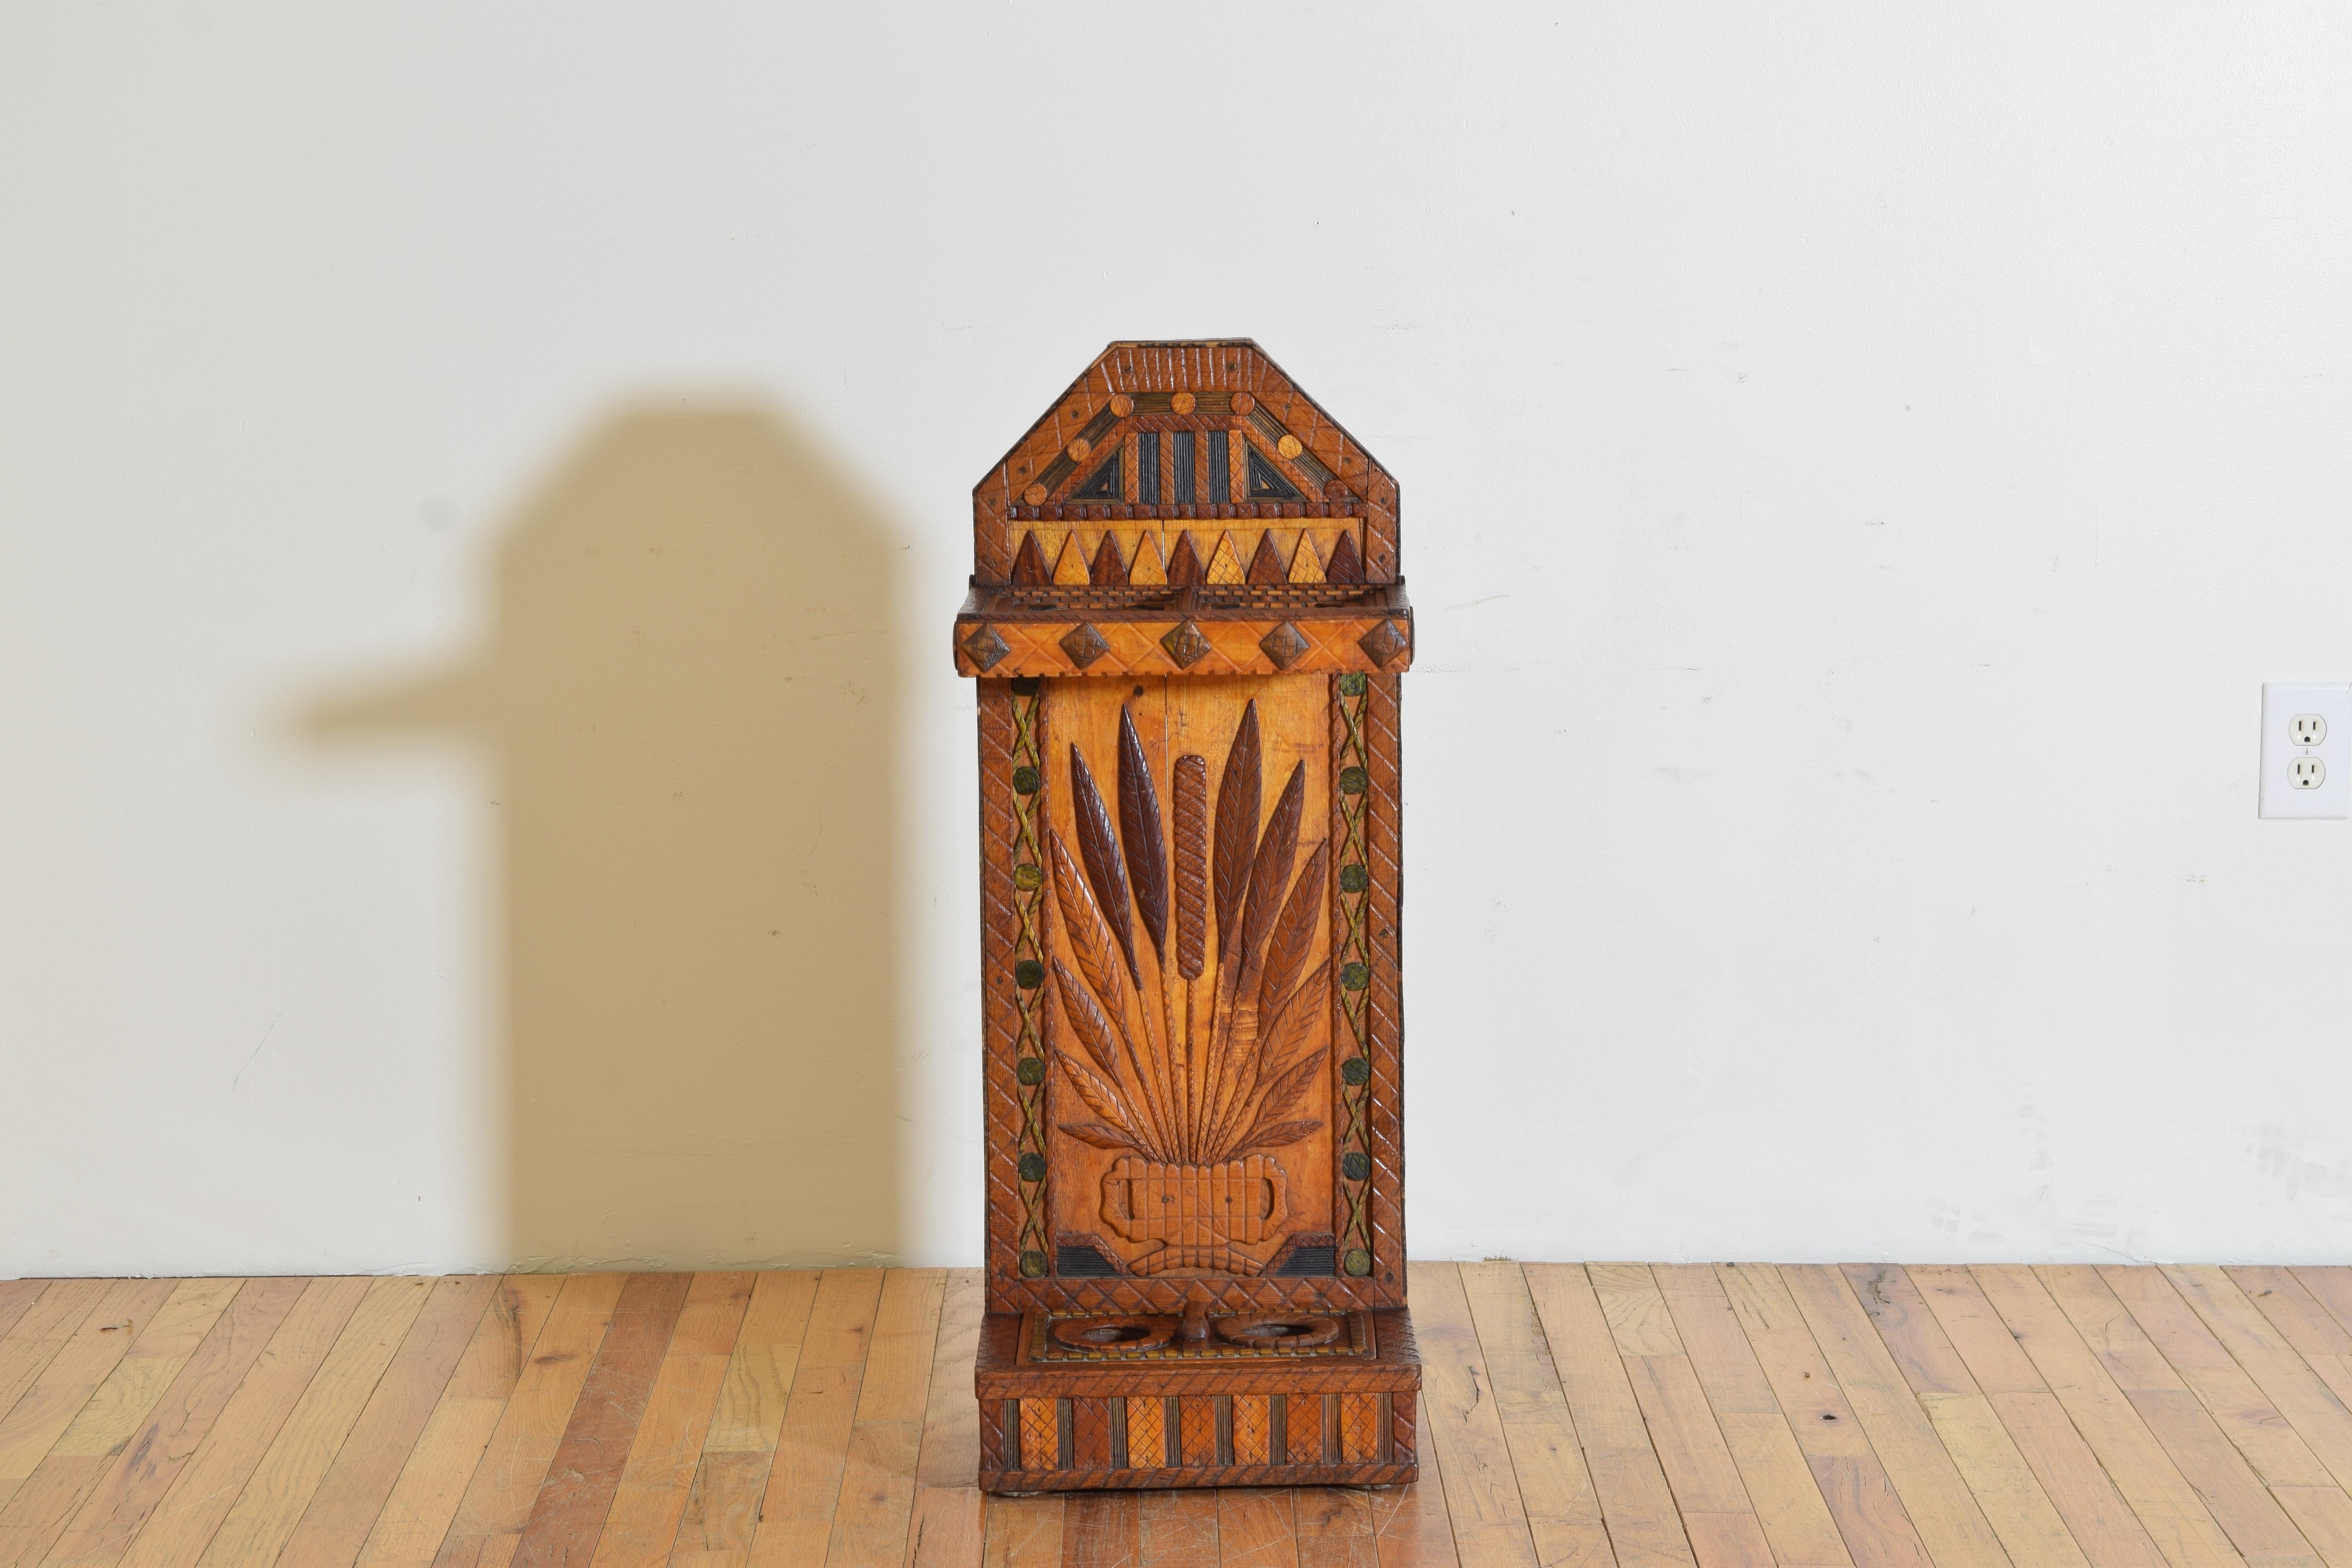 Uniquely shaped and expertly carved and painted this umbrella stand has an angular arched top with a double umbrella holder extending from the upper section, the main body decorated with stalks of wheat, the lower section having a removable